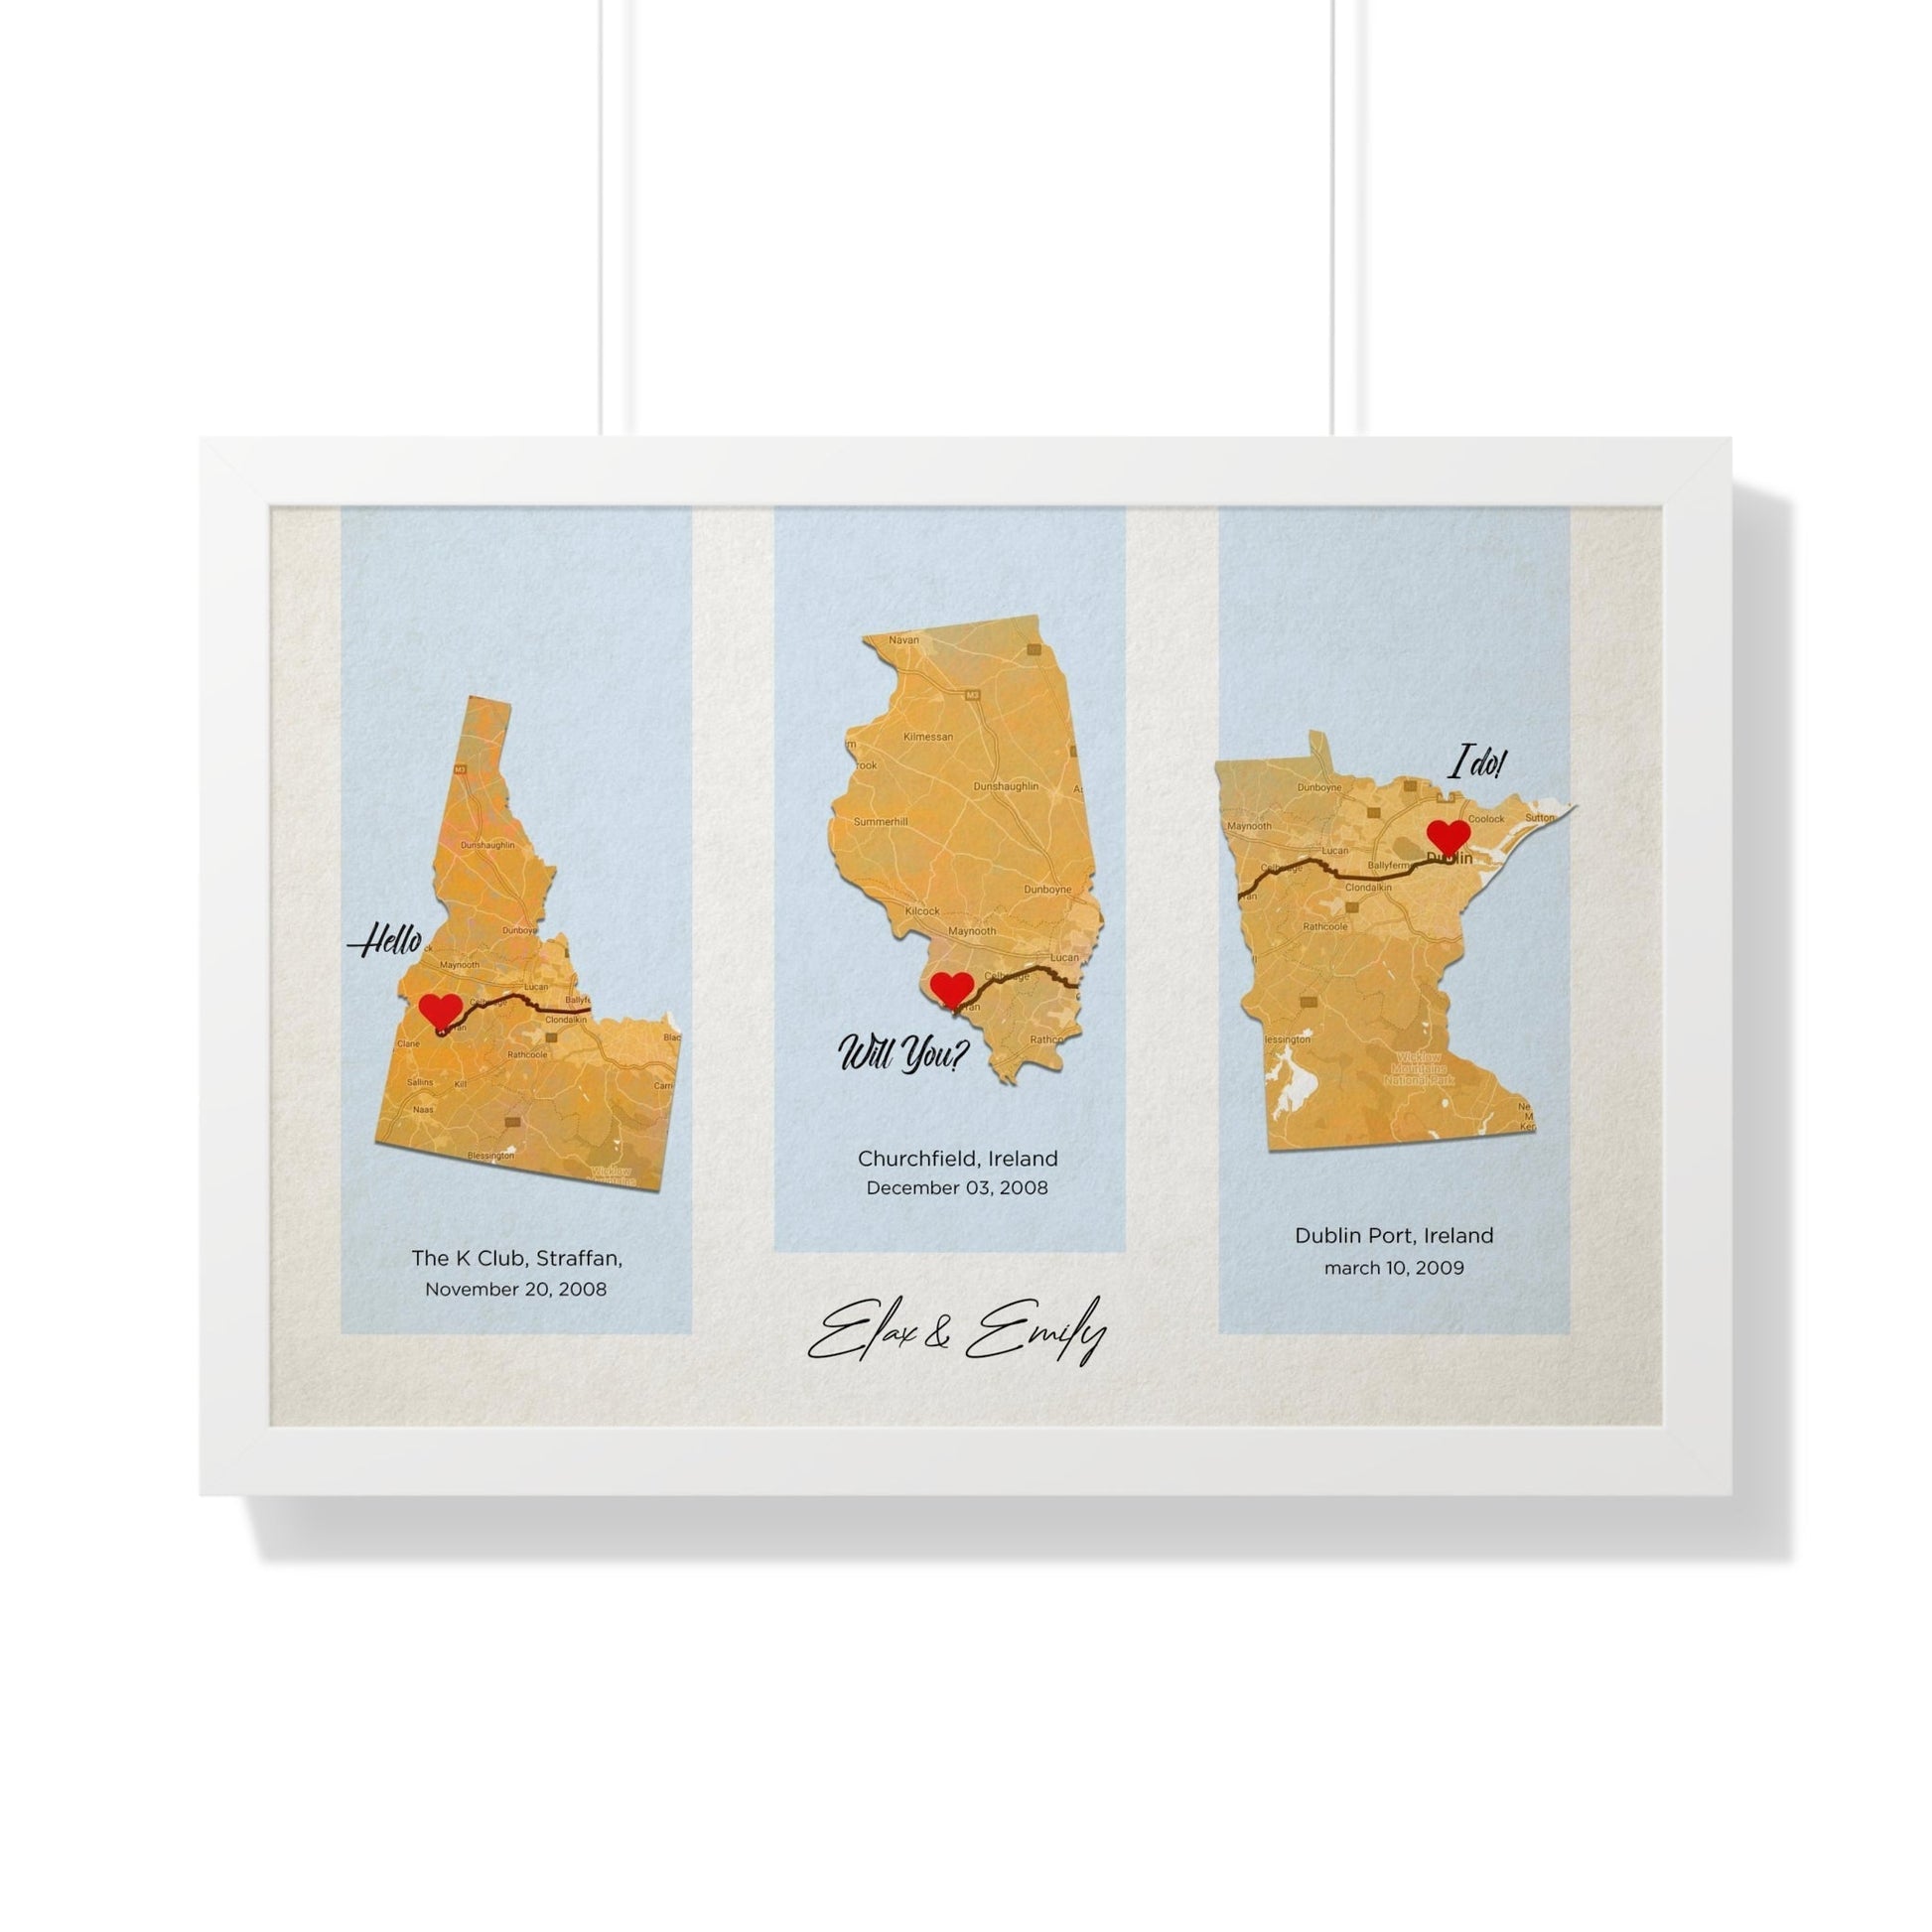 Map art depicting special location; meaningful gift with personal touch.